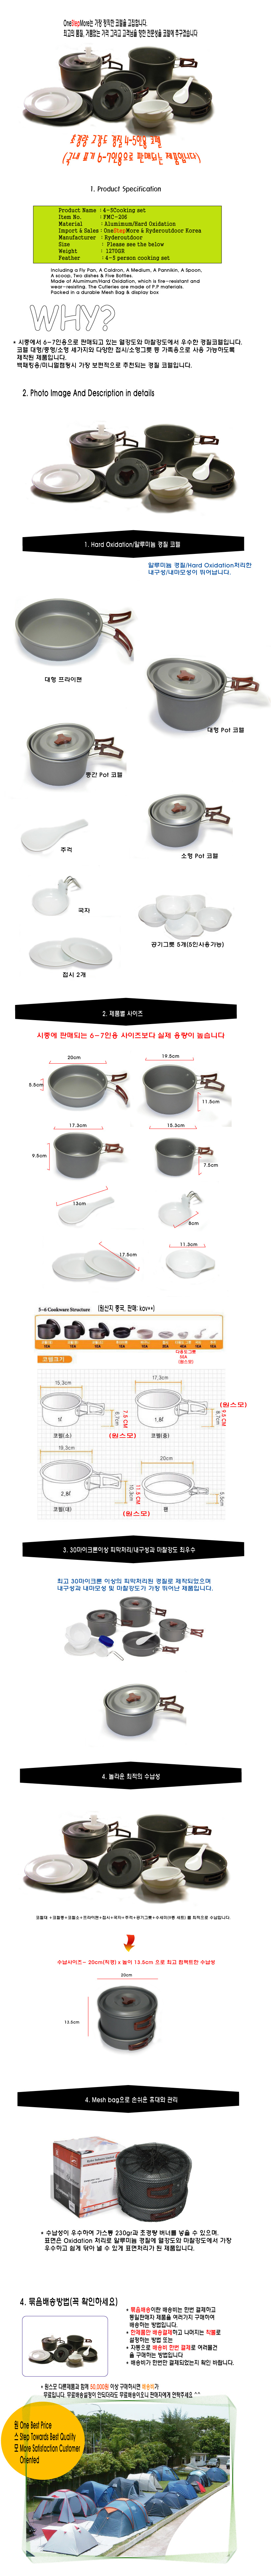 cookingset